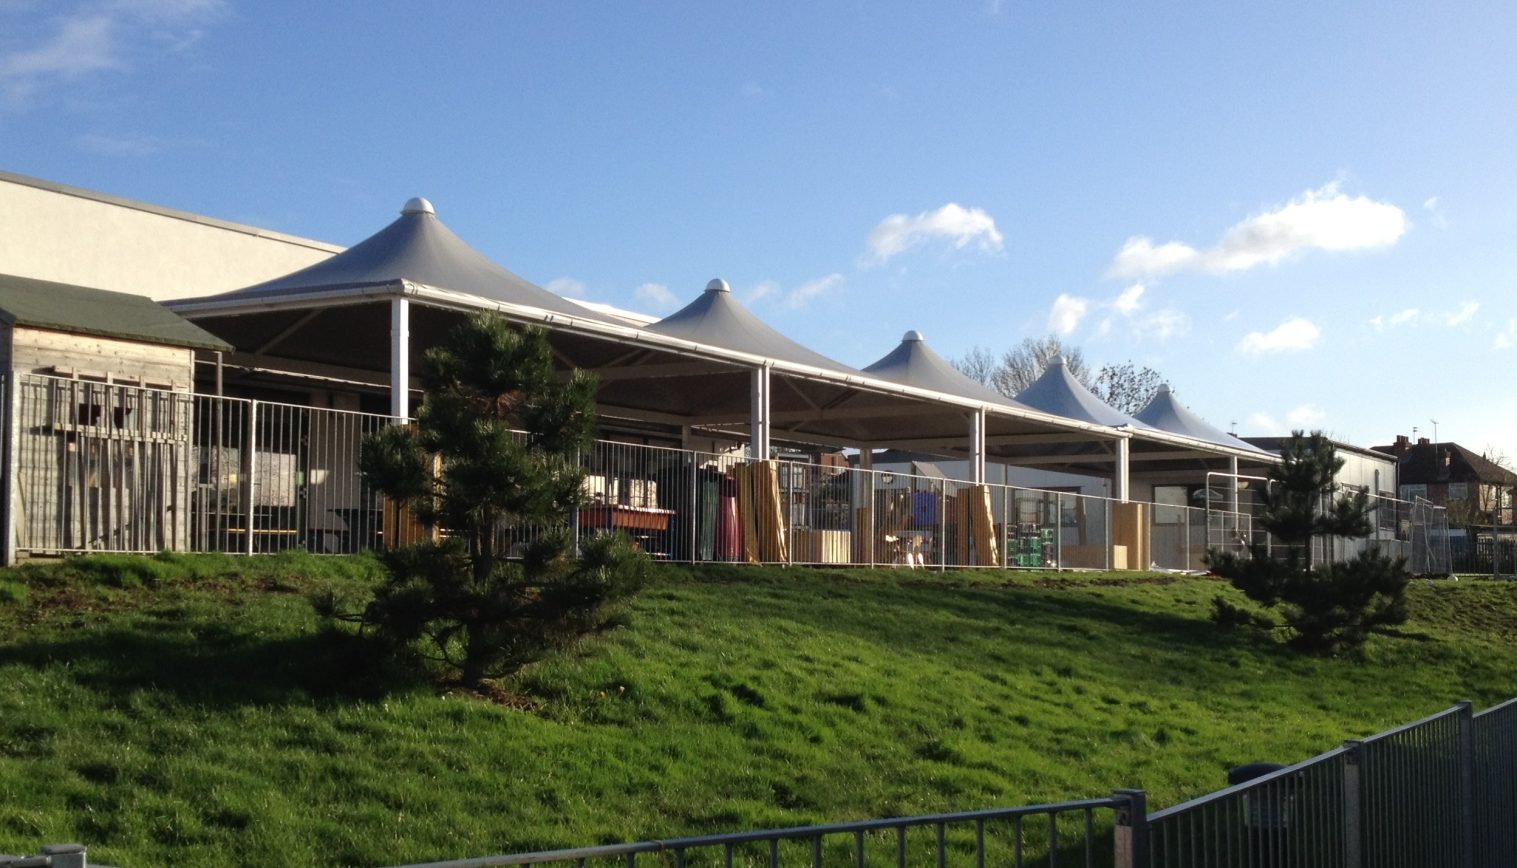 Underhill Infant School – 2nd Free Standing Tensile Fabric Canopy